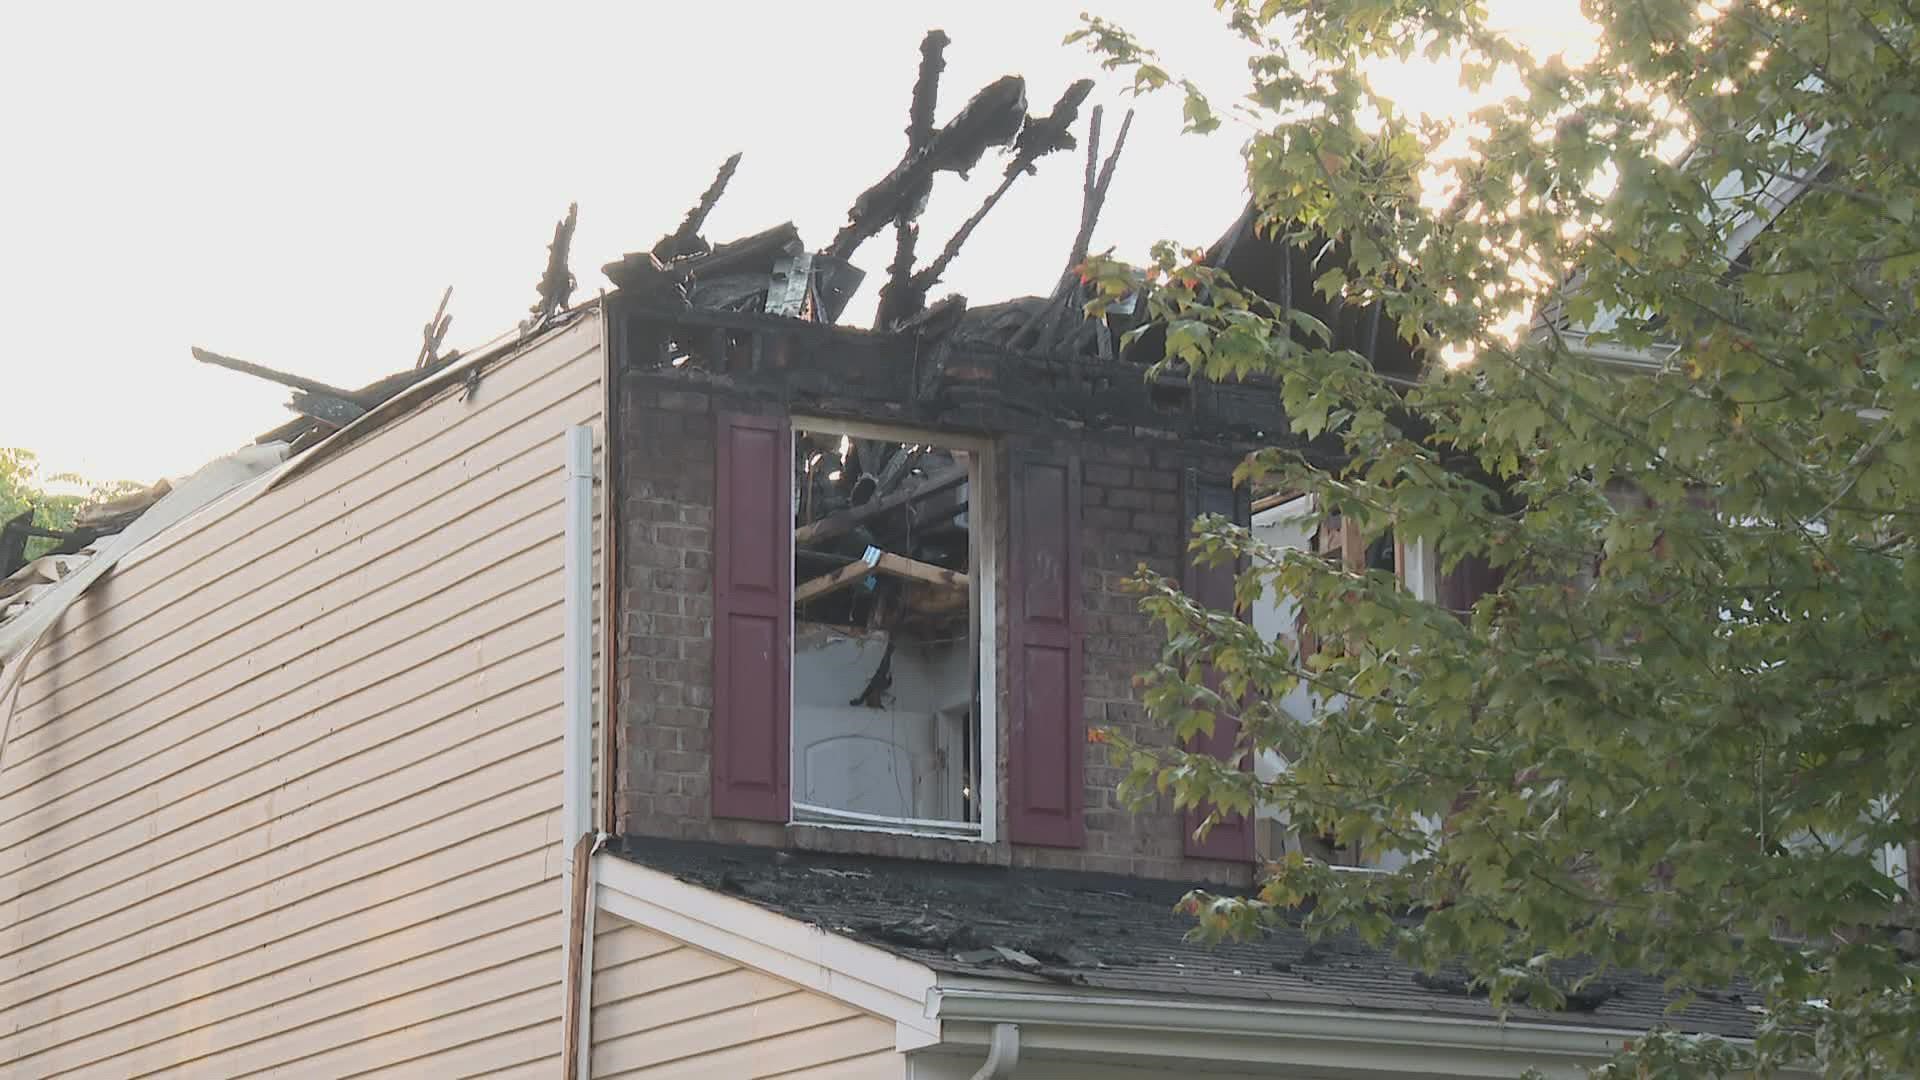 An off-duty High Point firefighter was heading home when he saw smoke coming from a home on Sycamore Point Trail.